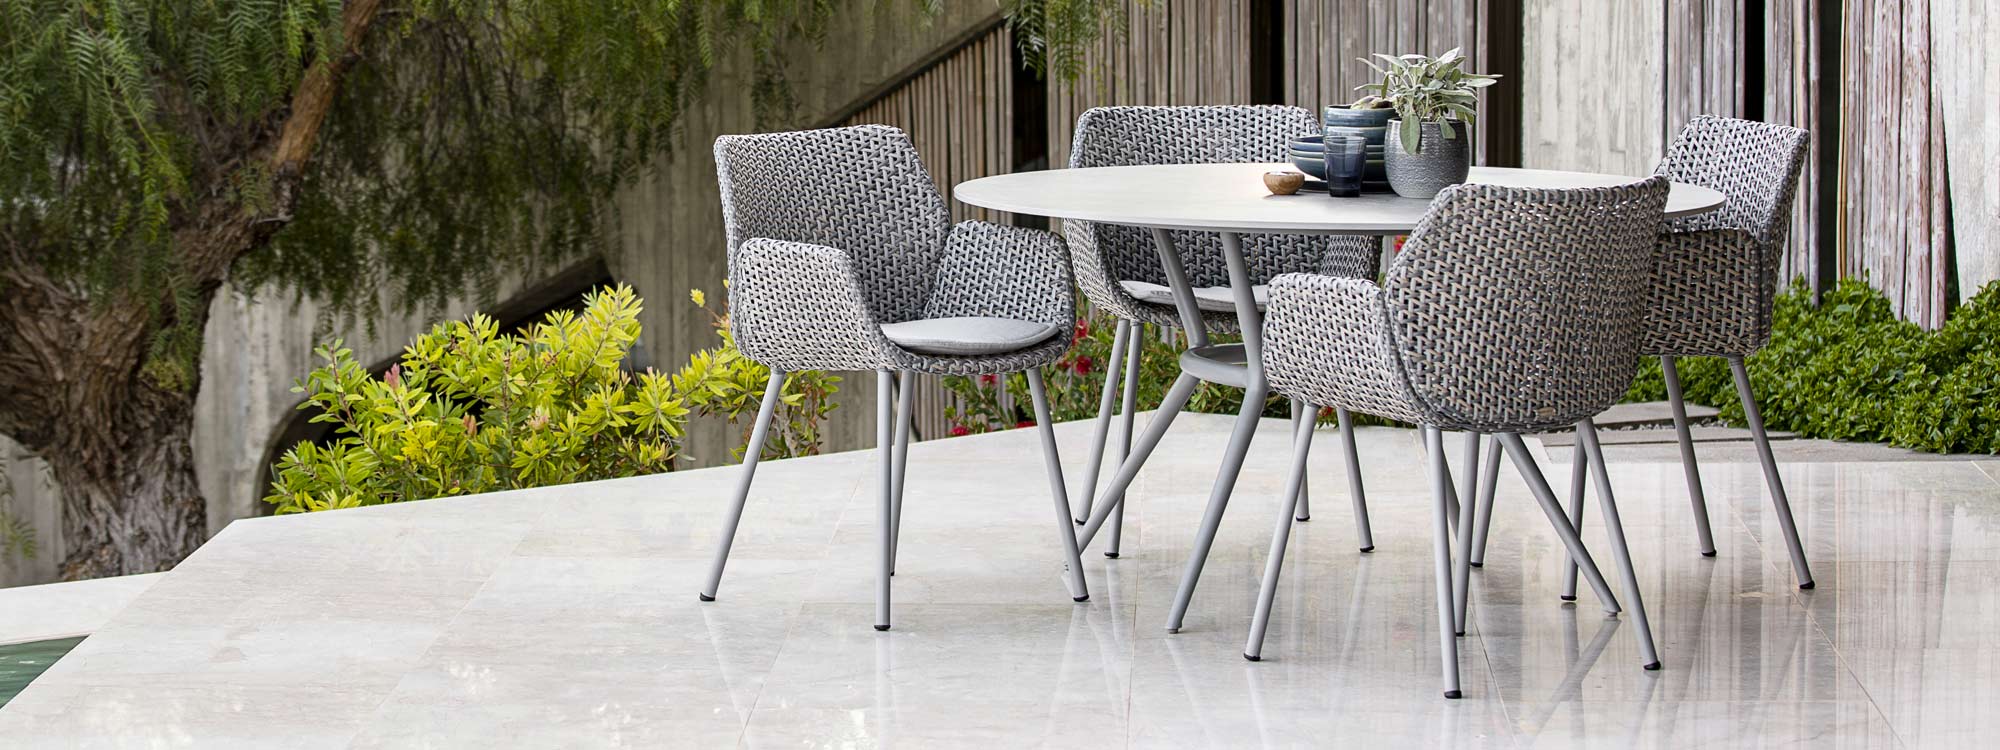 Vibe rattan garden chair is a modern outdoor dining chair in high quality garden furniture materials by Cane-line all-weather furniture